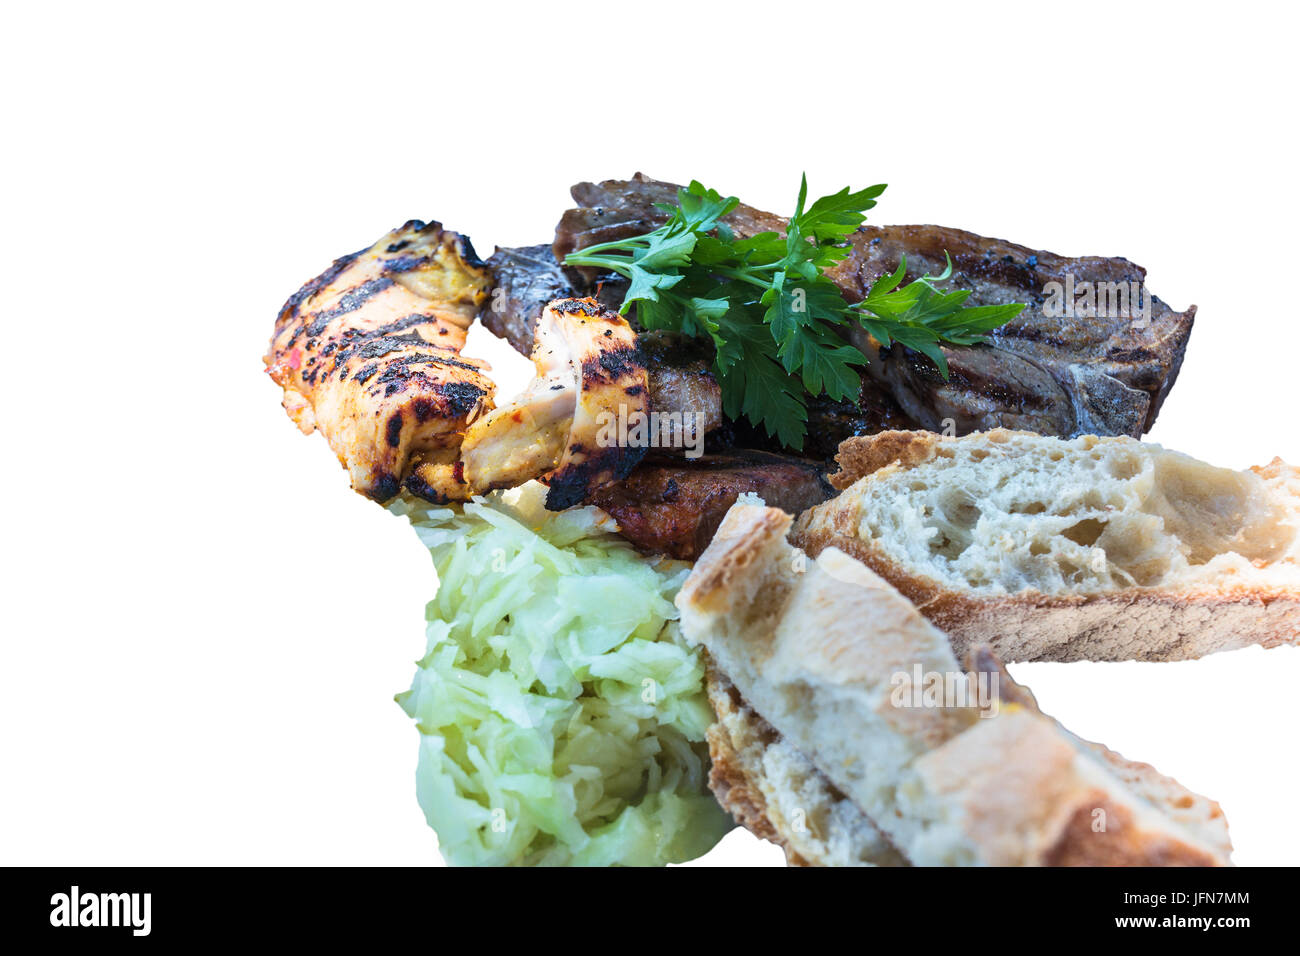 Fresh grilled meats variety meats with bread and coleslaw. Stock Photo